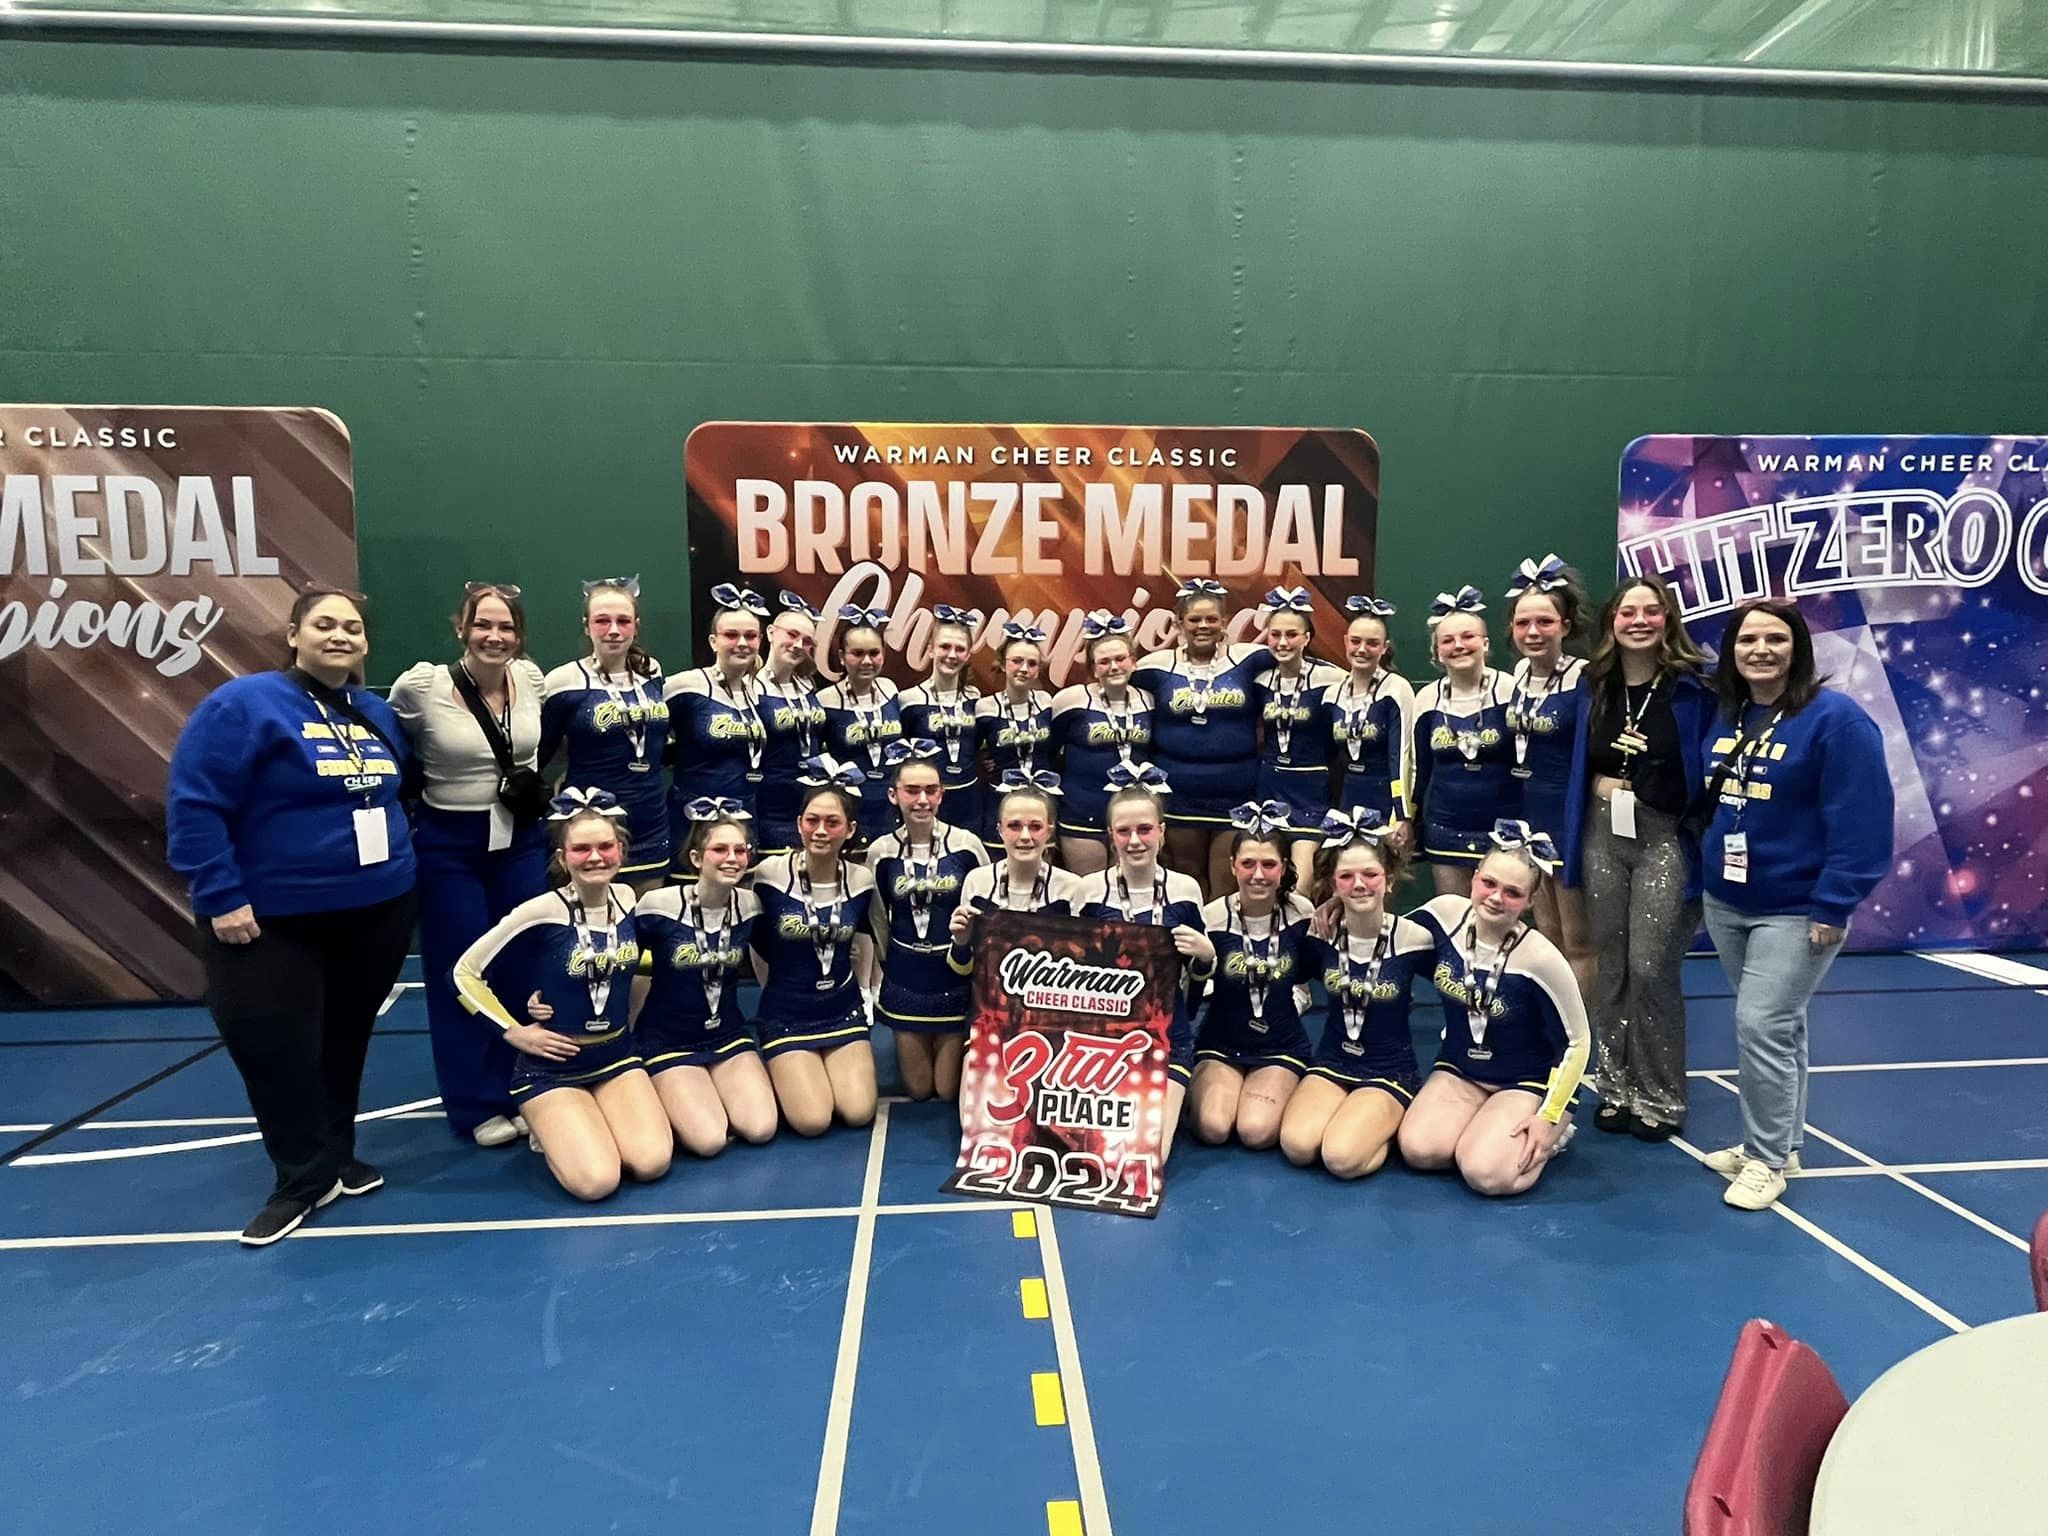 Cheer Team Competes in Warman